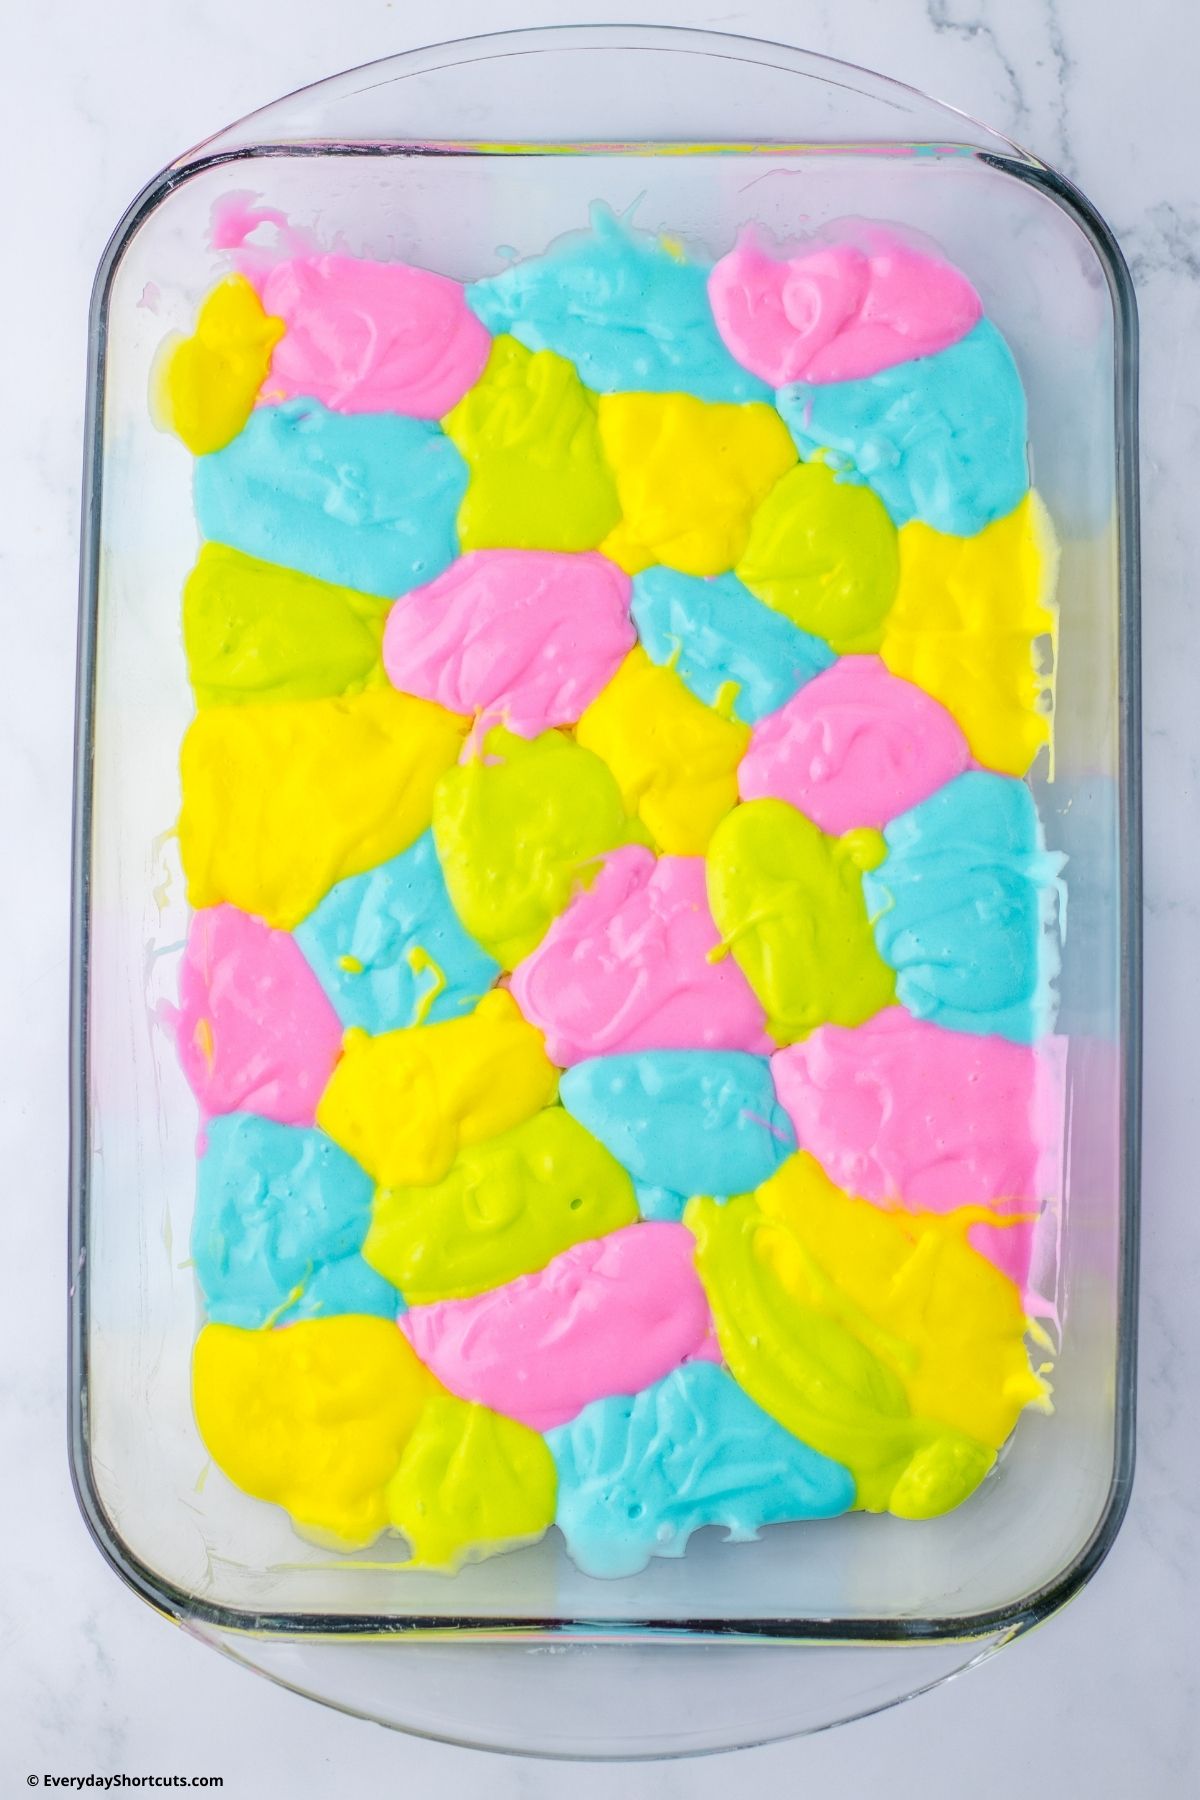 pastel colored cake batter in a baking dish